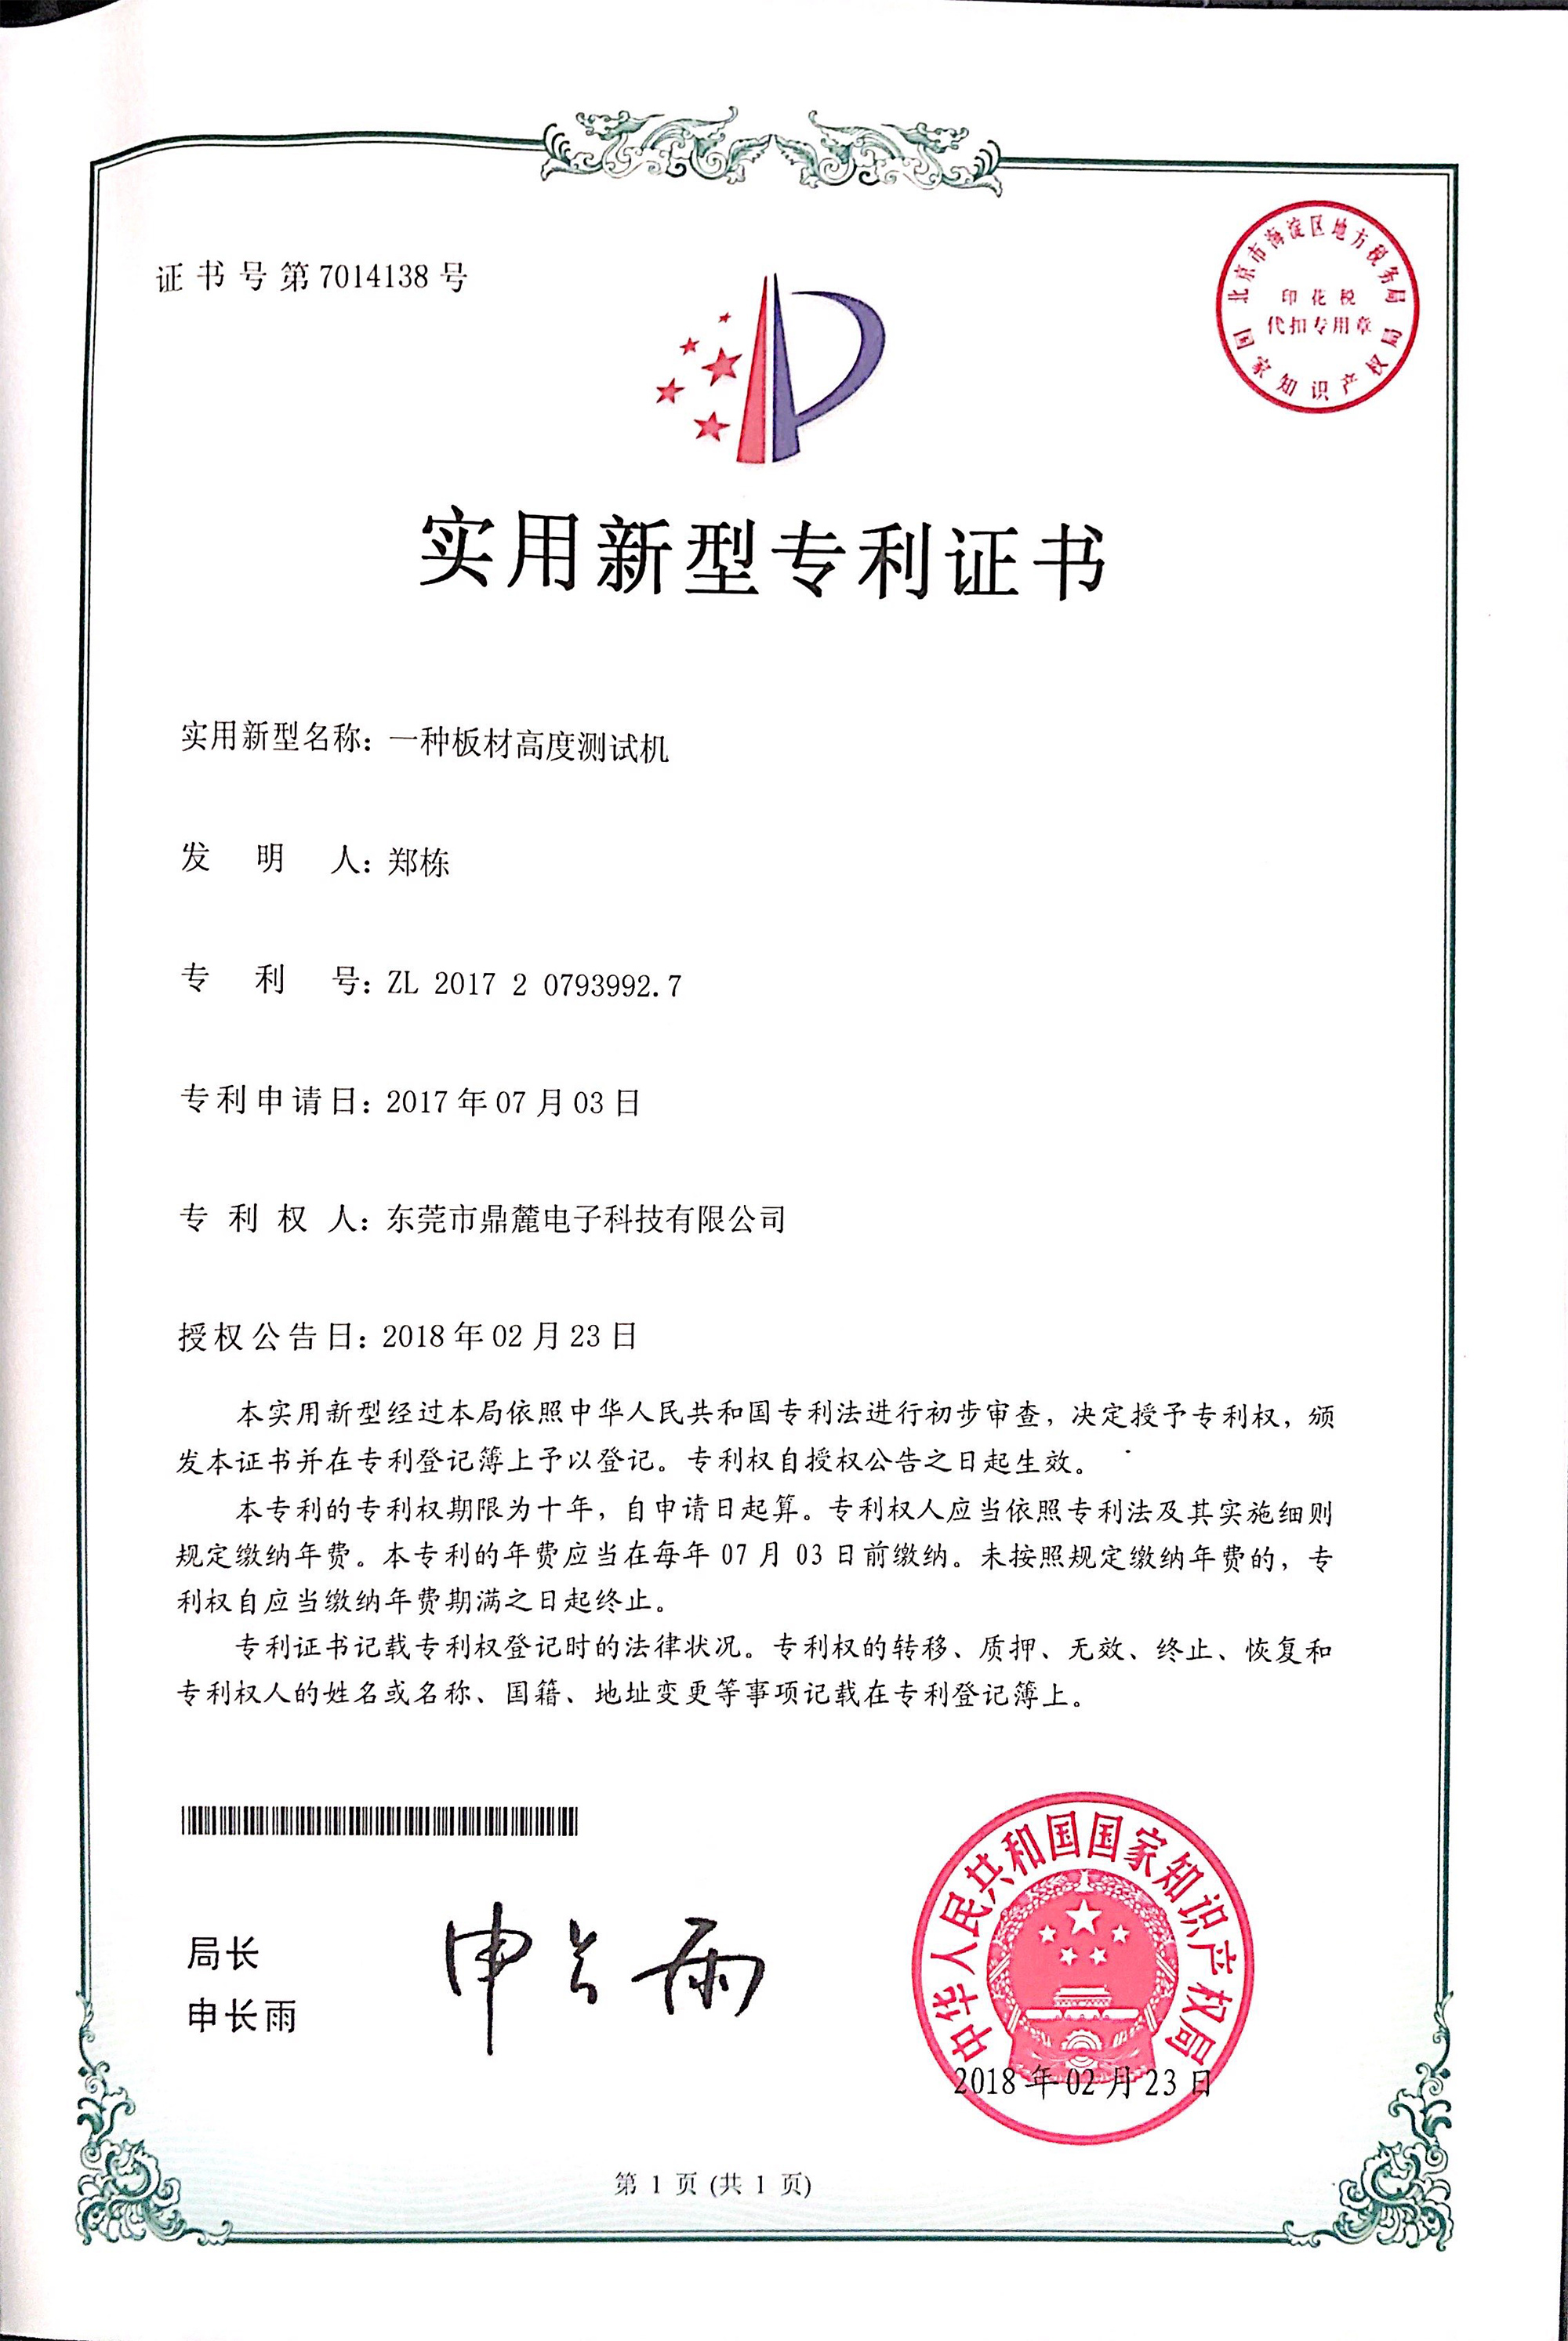 Plate Height Testing Machine - Utility Model Patent Certificate